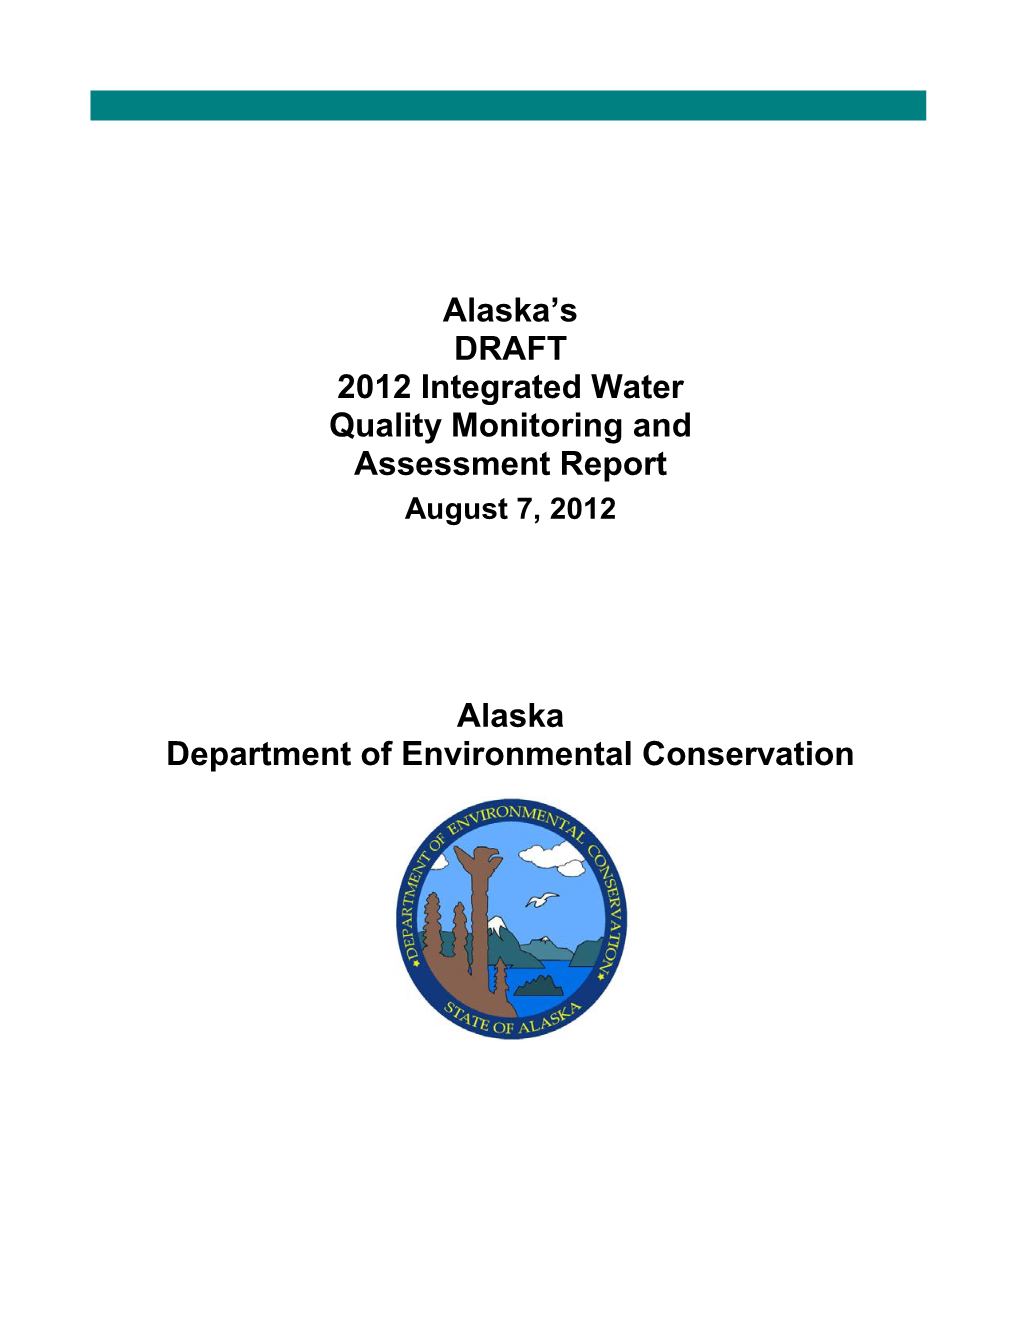 Alaska's DRAFT 2012 Integrated Water Quality Monitoring and Assessment Report Alaska Department of Environmental Conservatio